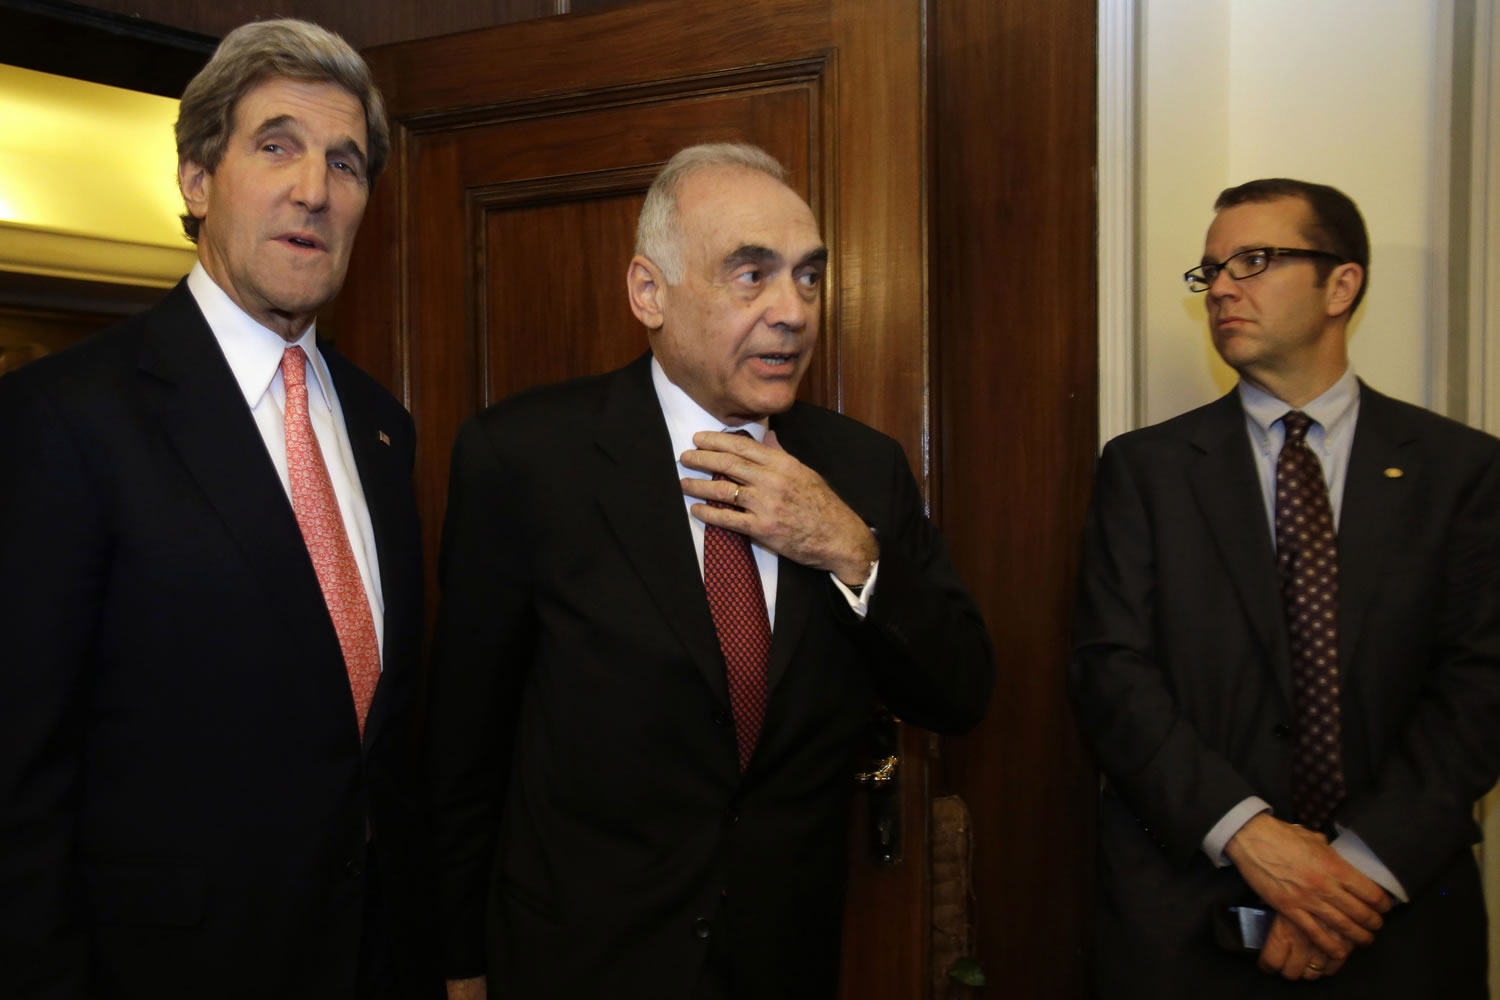 Egyptian Foreign Minister Mohammed Kamel Amr, center, enters a news conference with U.S. Secretary of State John Kerry to speak to the media Saturday at the Ministry of Foreign Affairs in Cairo, Egypt.